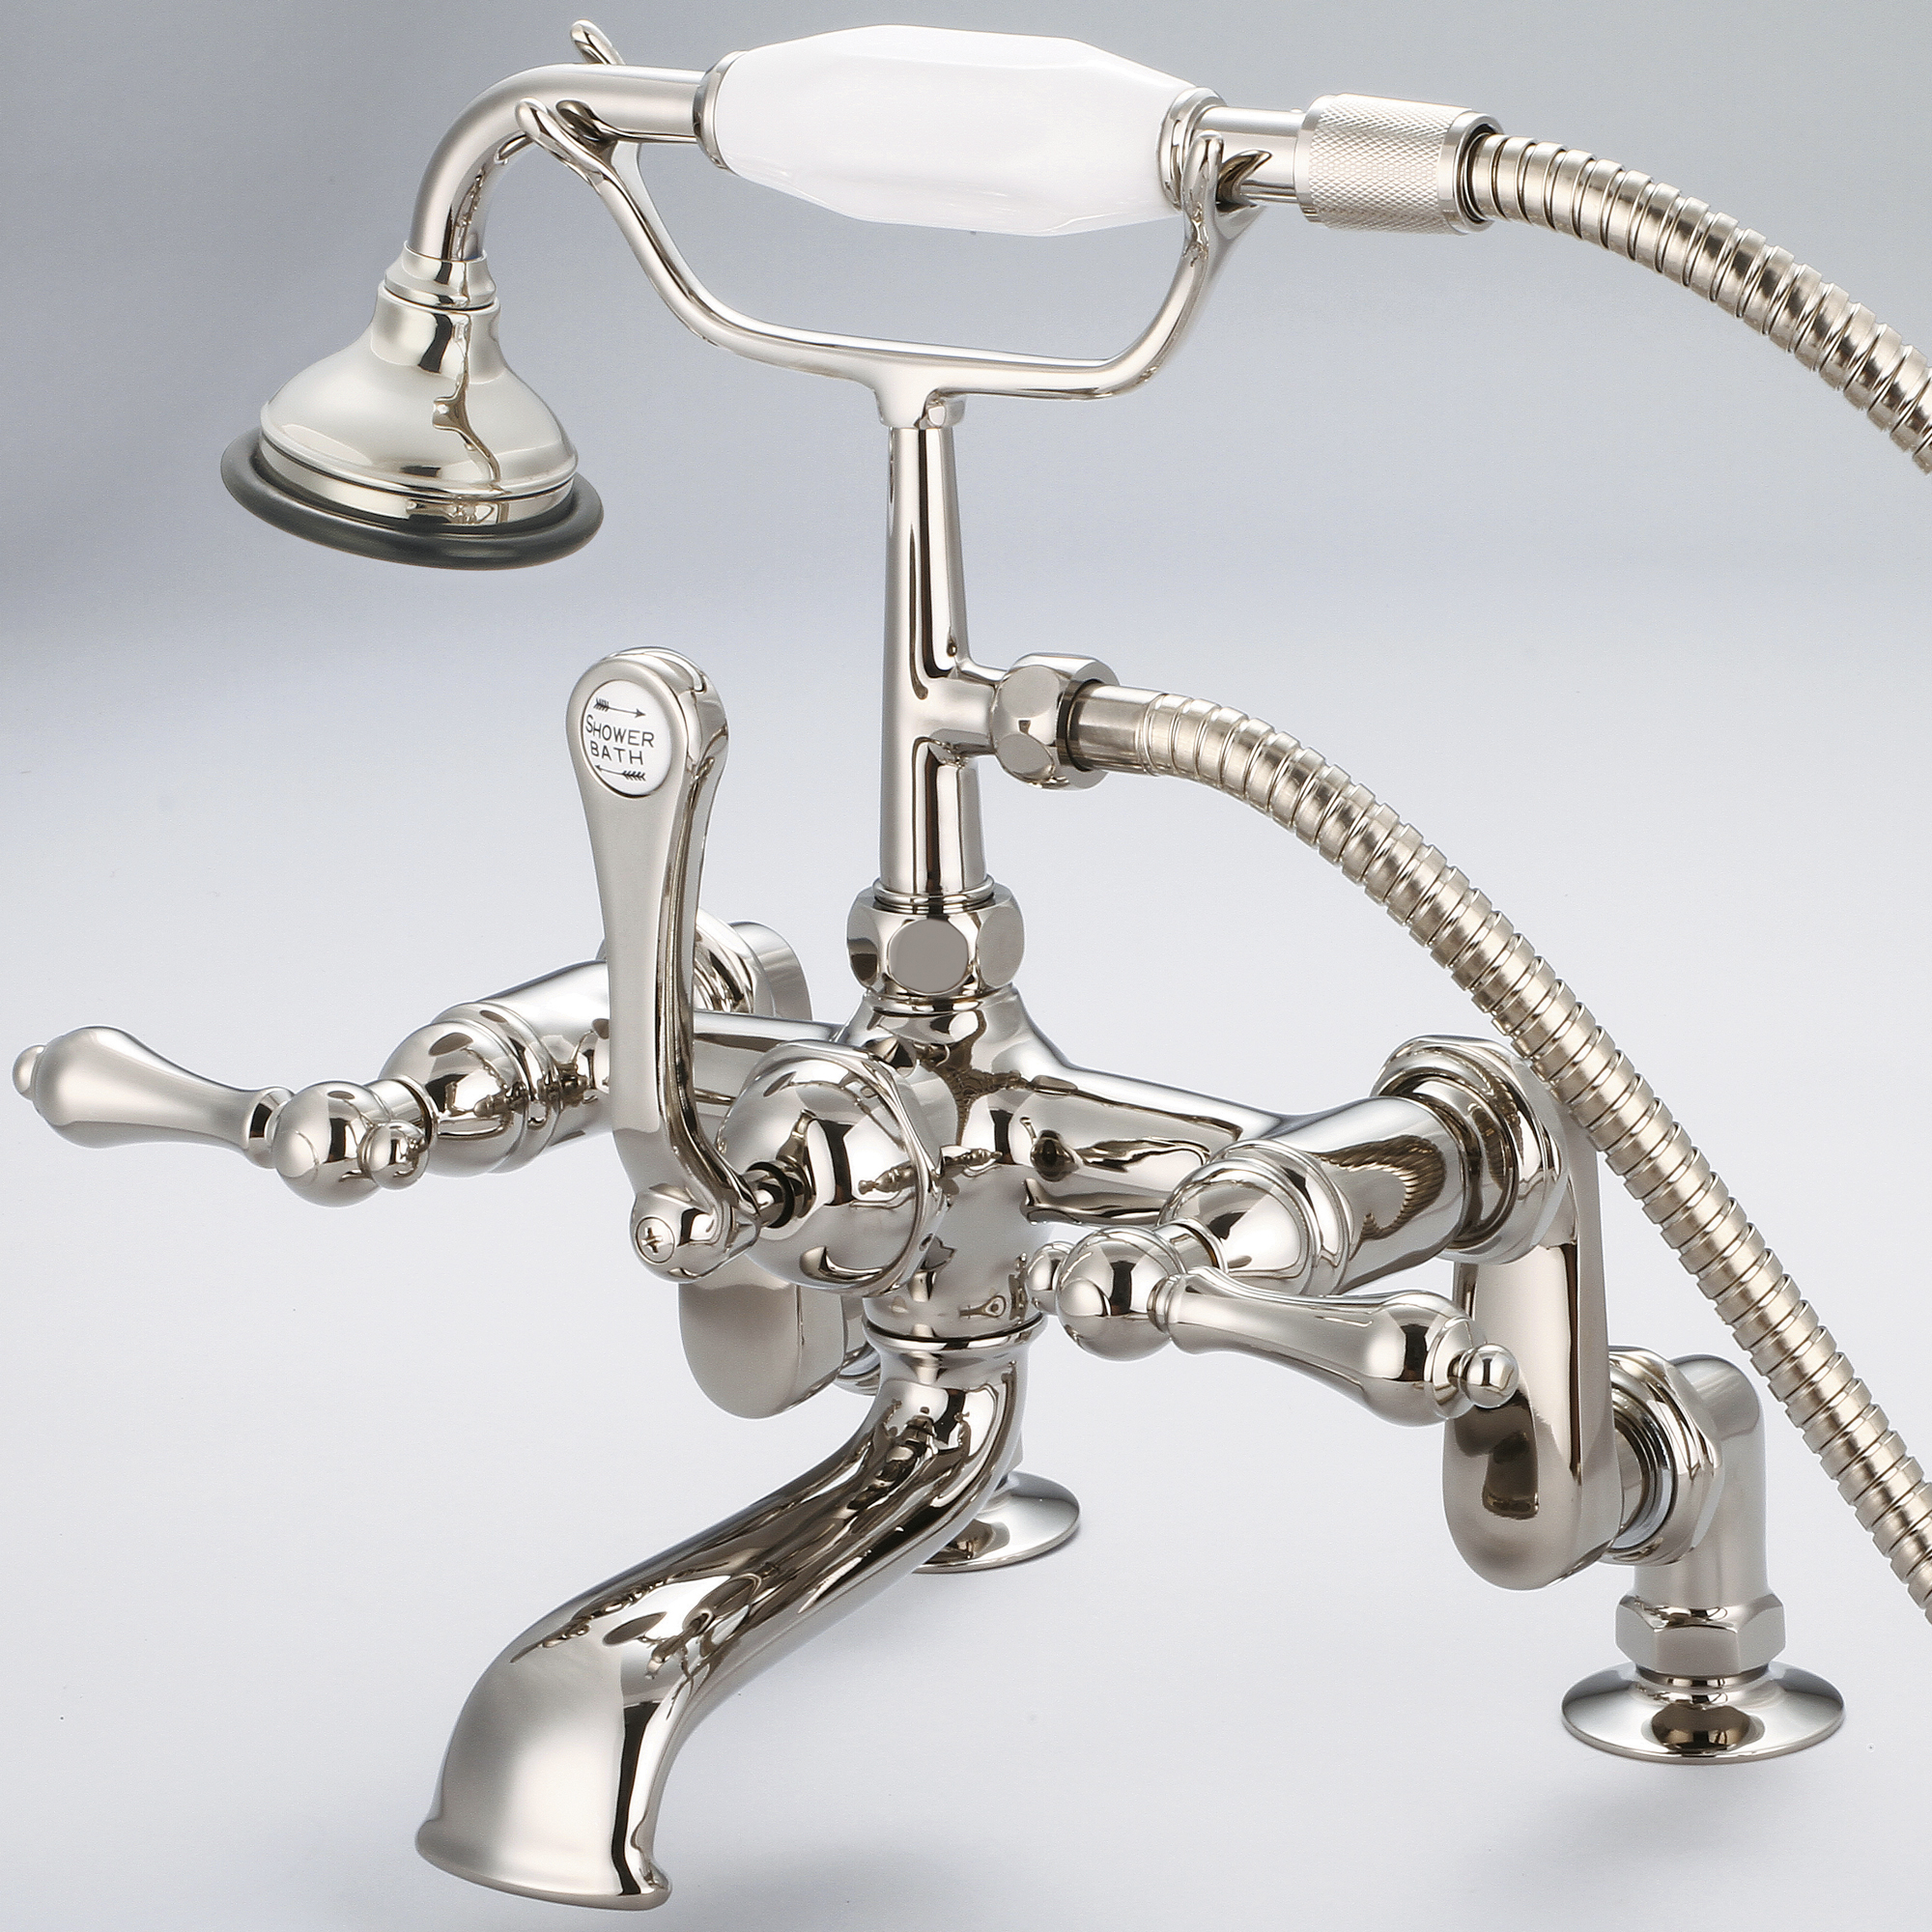 Vintage Classic Adjustable Center Deck Mount Tub Faucet With Handheld Shower in Polished Nickel (PVD) With Metal Lever Handles Without Labels